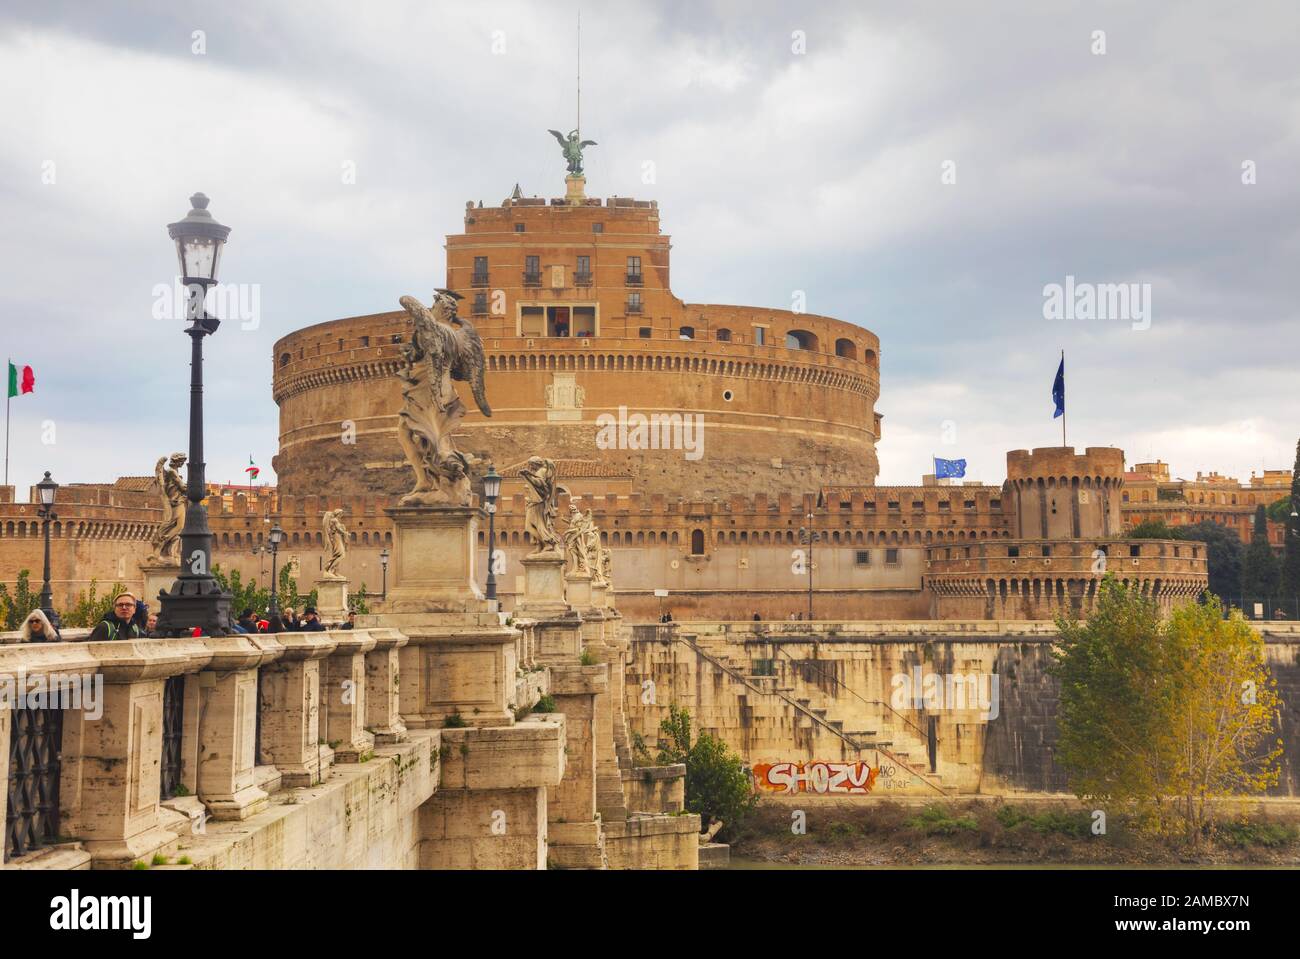 ROME - DECEMBER 12: The Mausoleum of Hadrian (Castel and Ponte Sant'Angelo) with people on December 12, 2019 in Rome, Italy. Stock Photo